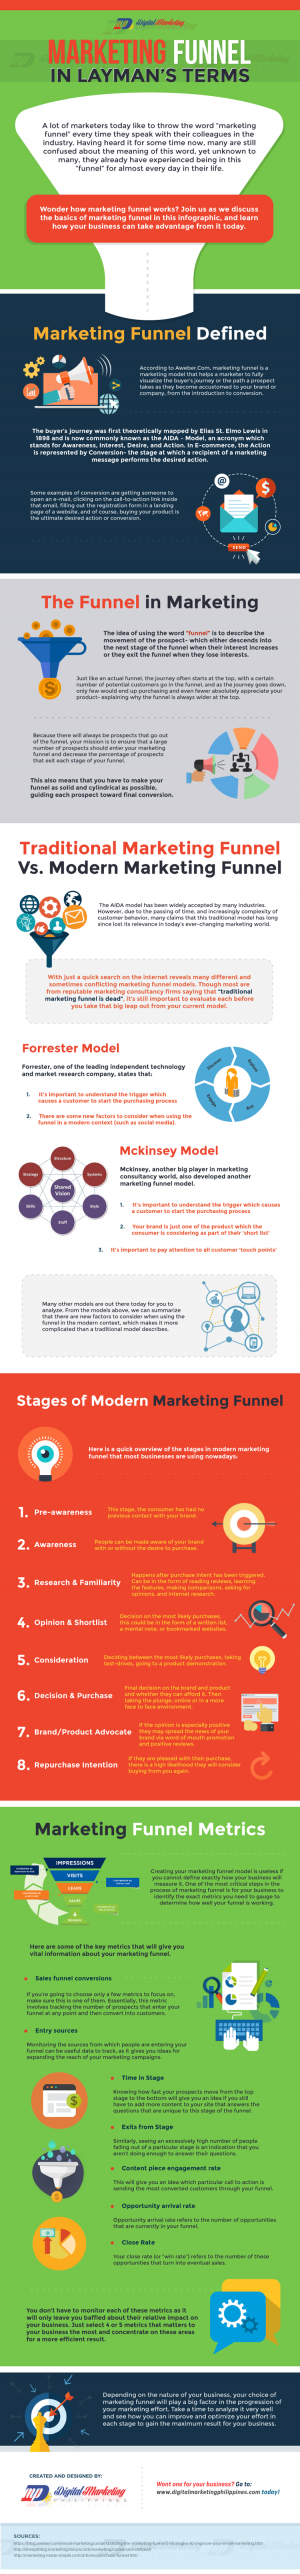 Marketing Funnel in Layman’s Terms (Infographic) | Digital Marketing ...